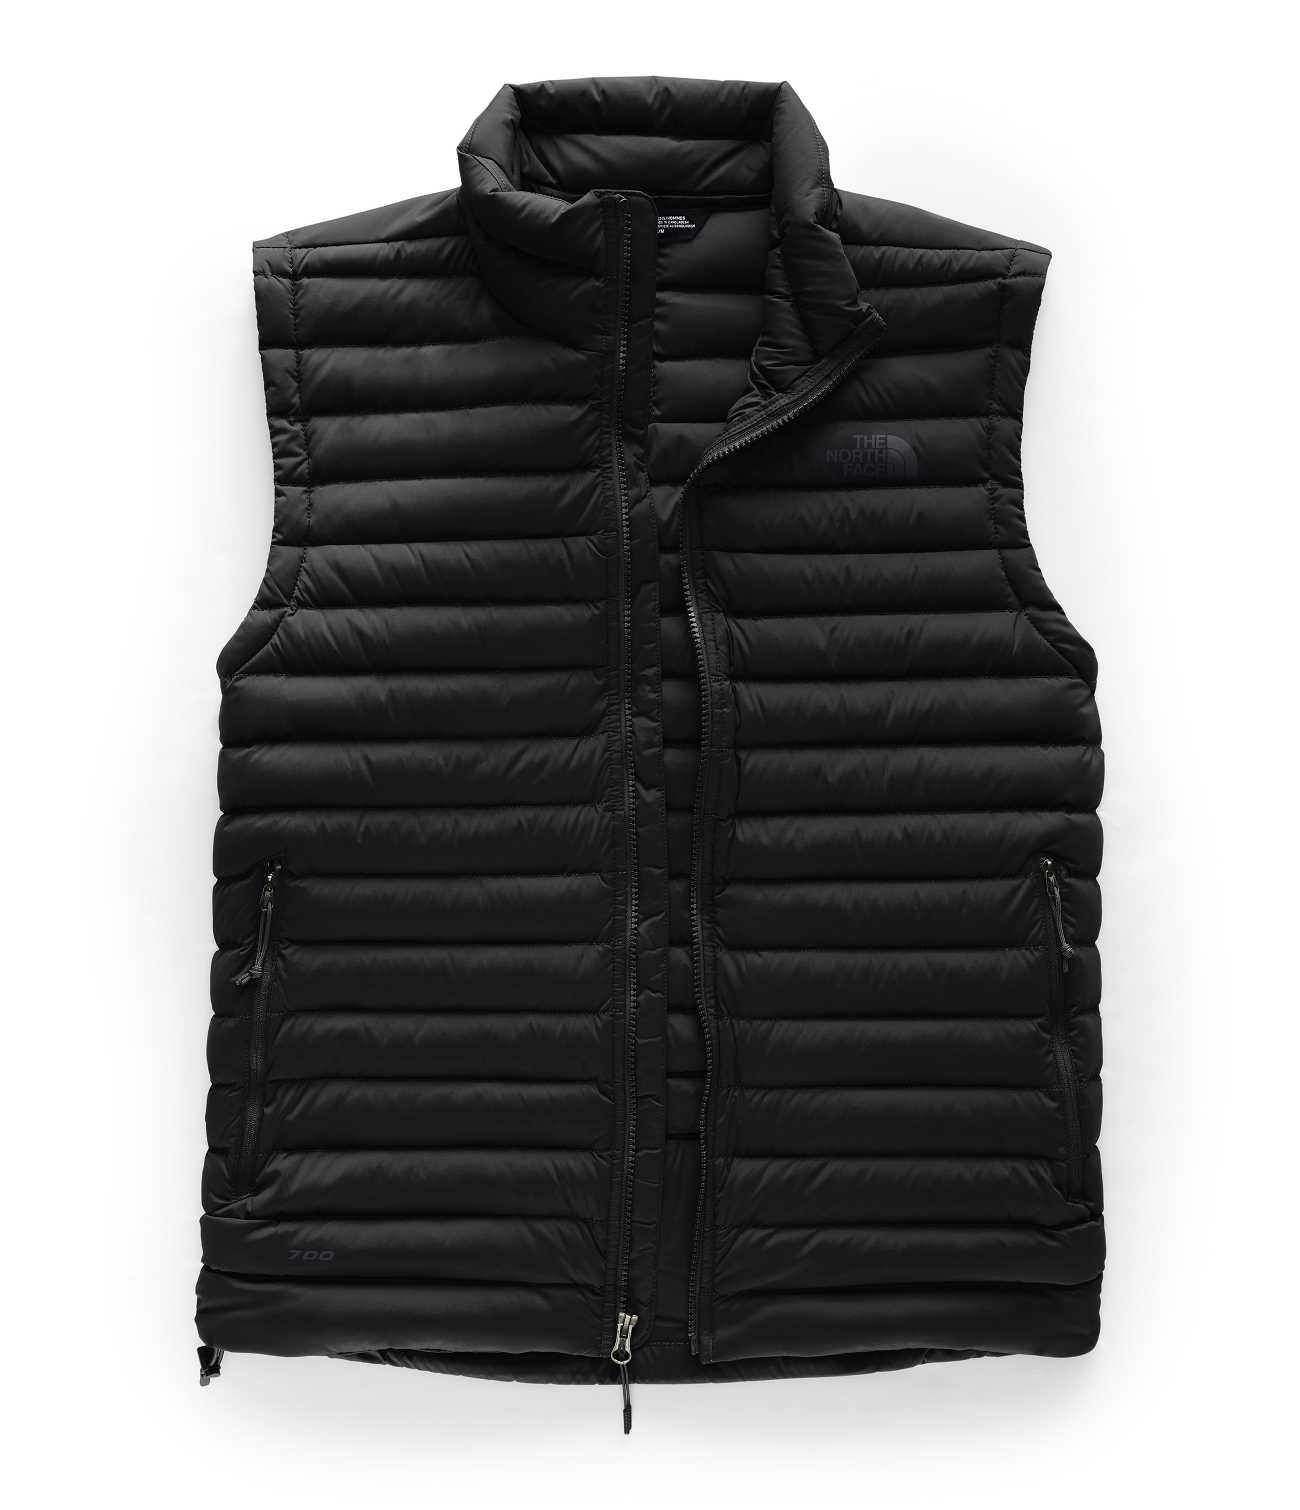 MEN'S STRETCH DOWN VEST | The North Face | The North Face Renewed